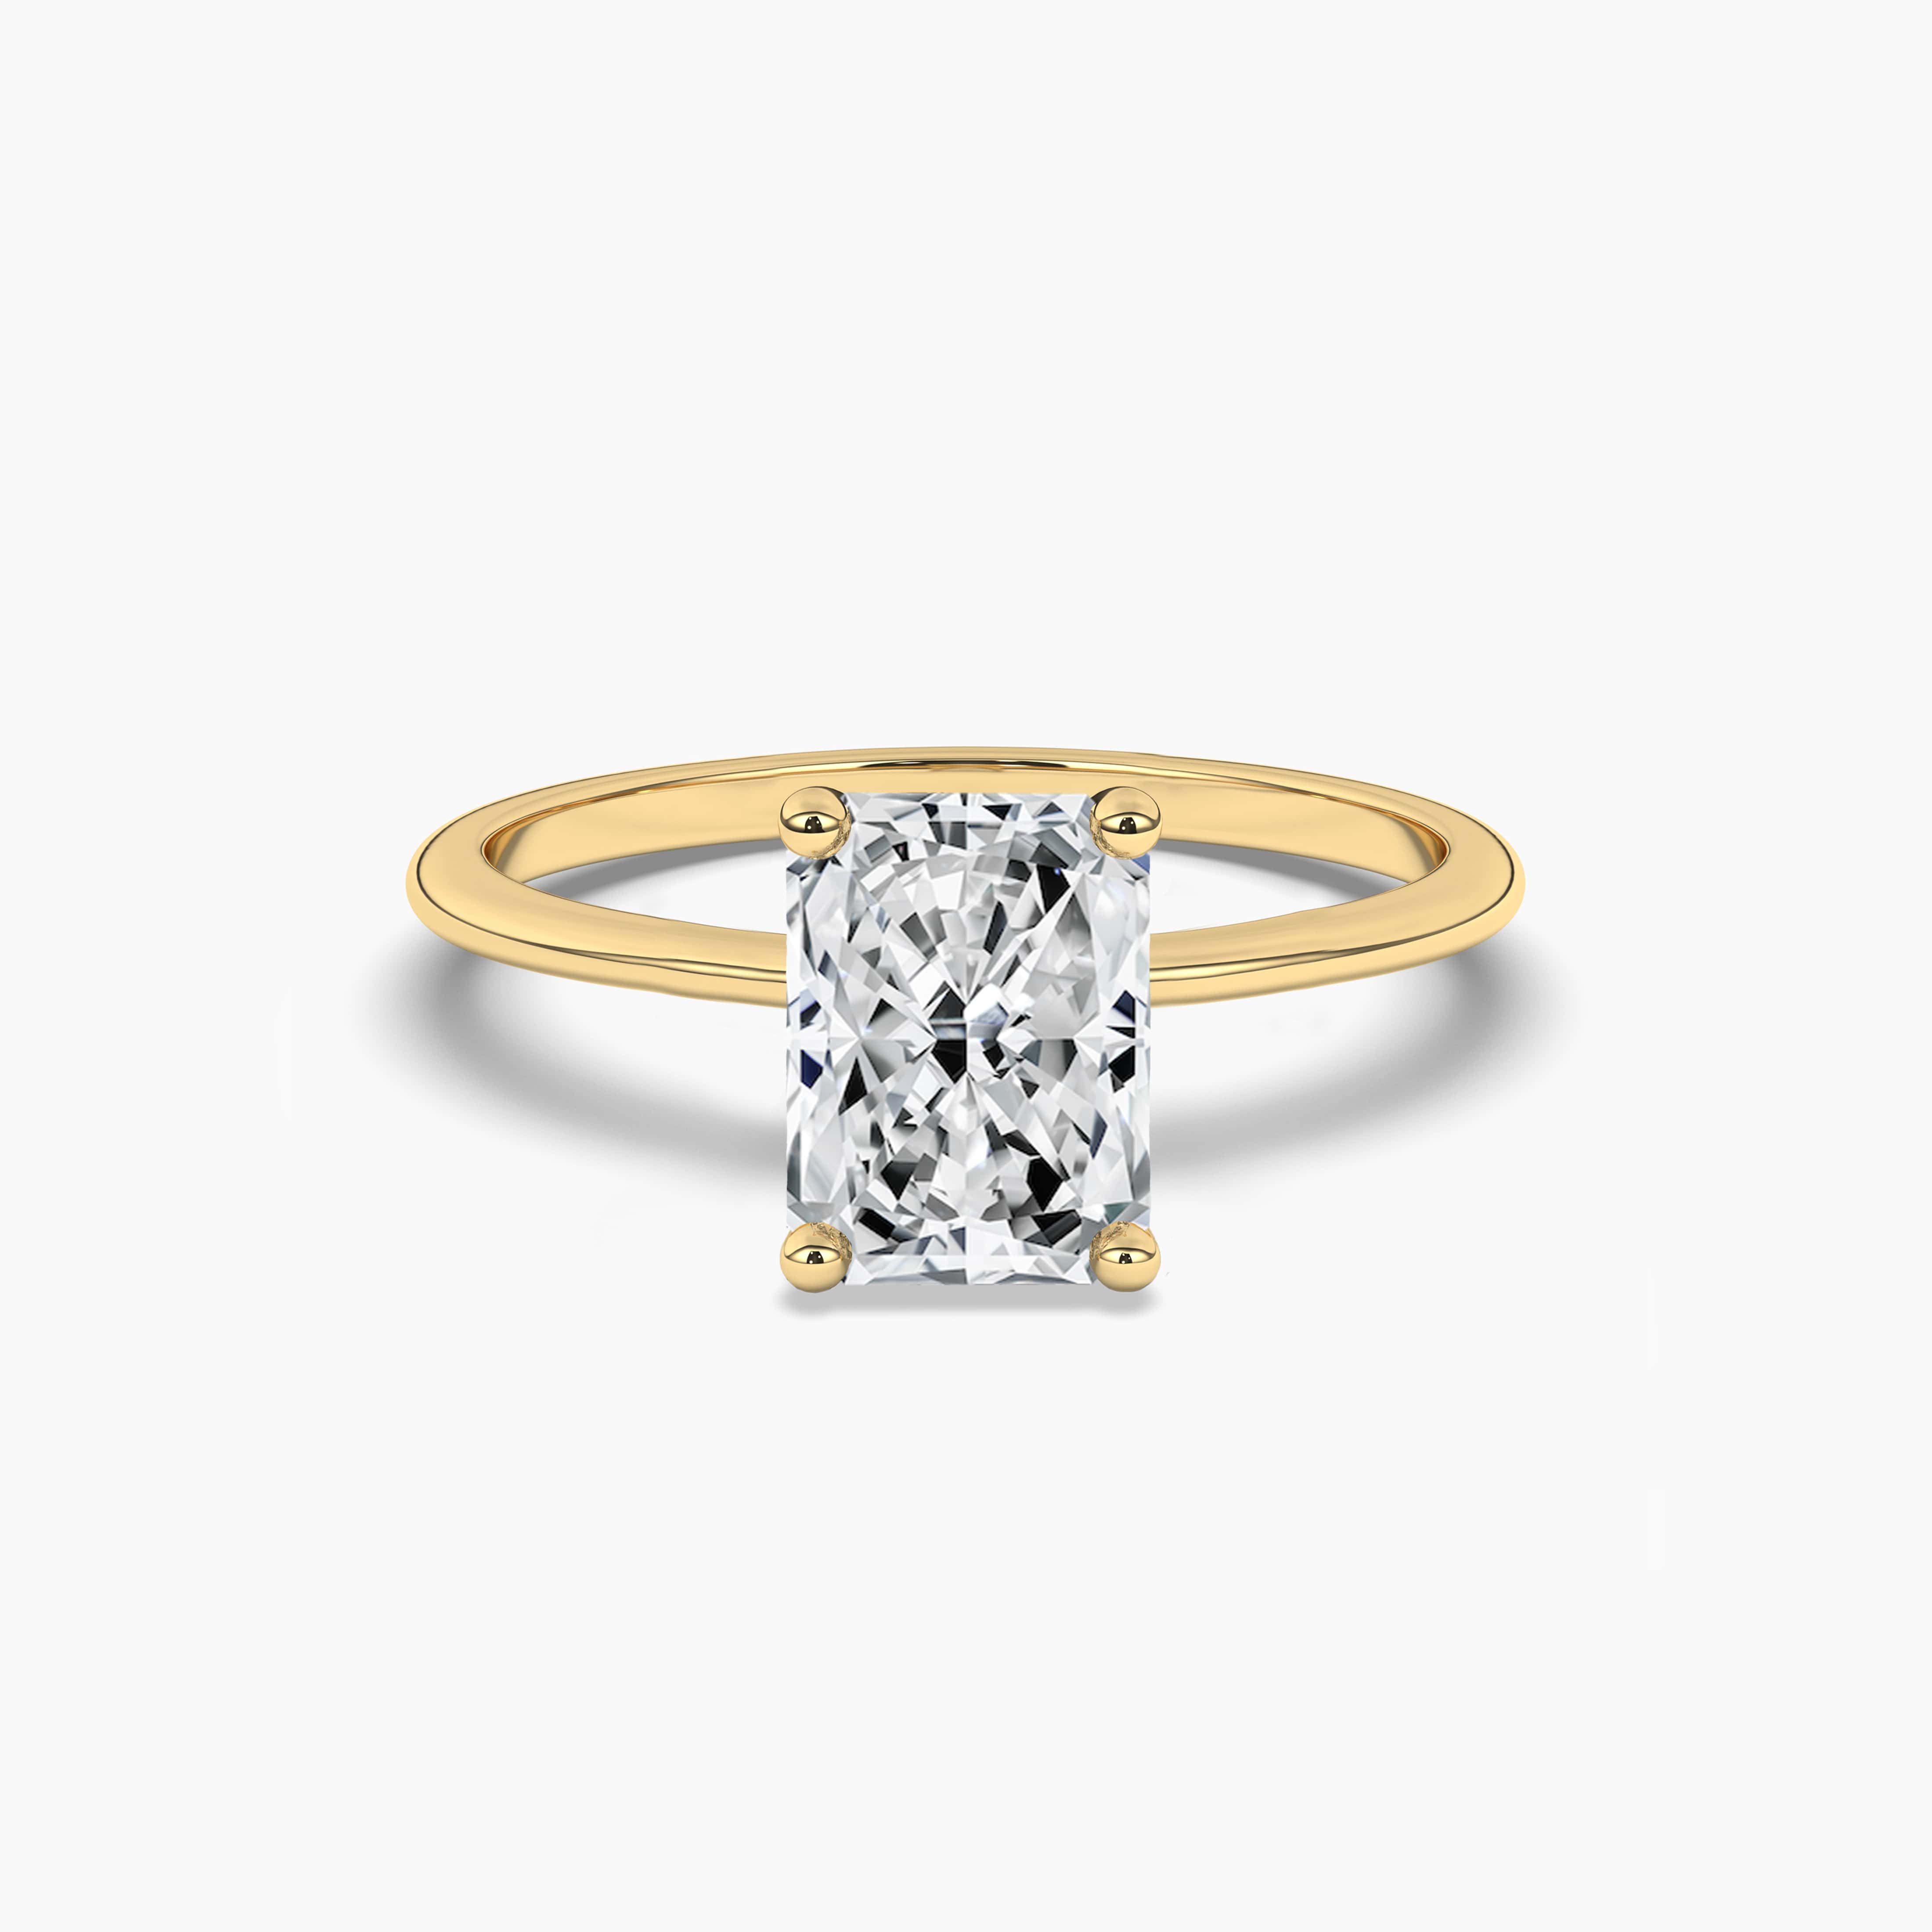 Radiant cut solitaire engagement rings